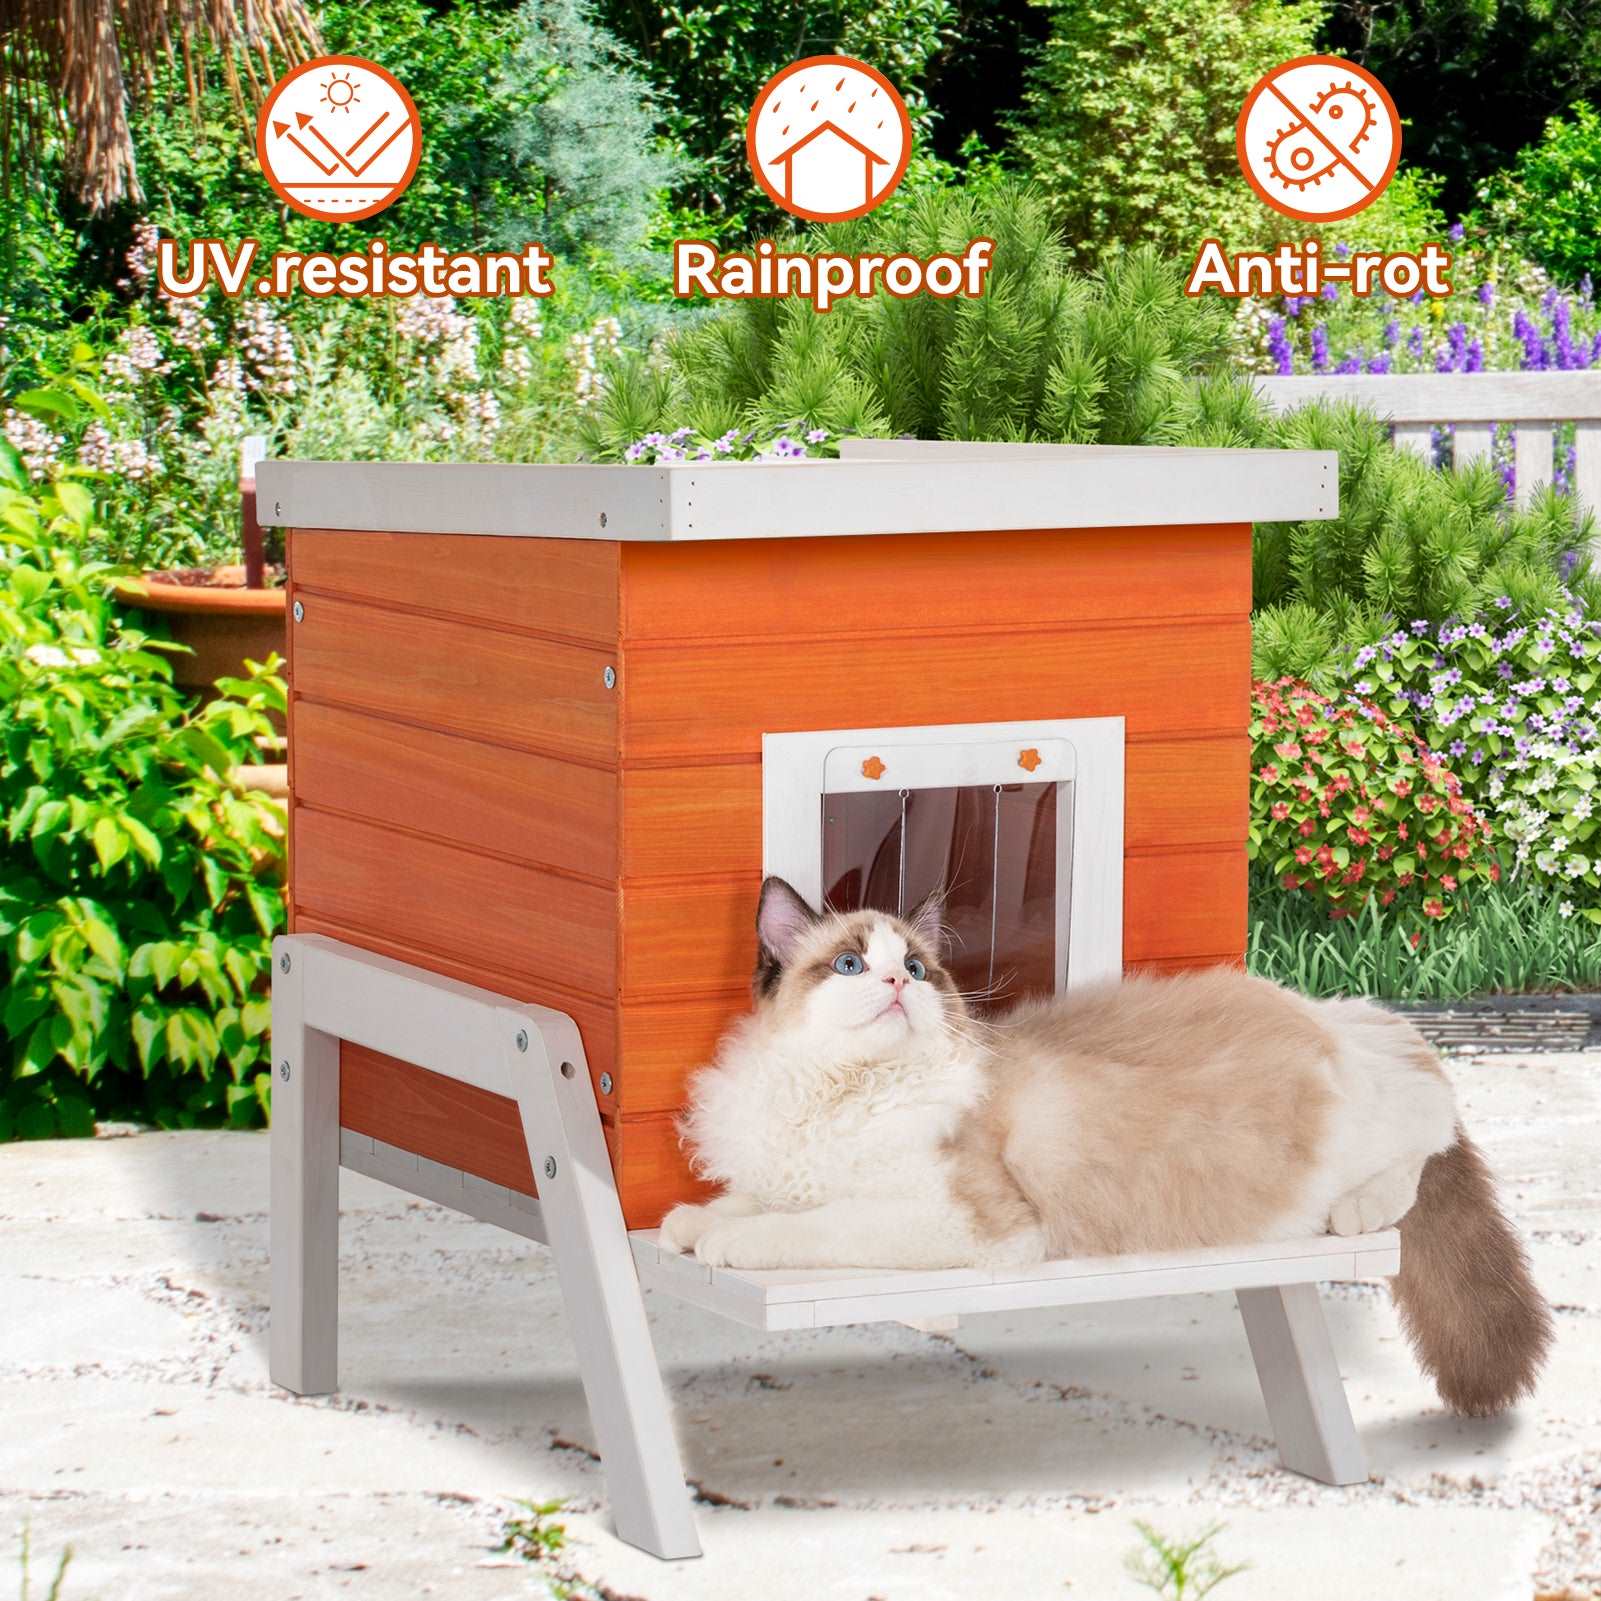 petsfit-cat-house-outdoor-insulated-high-feet-feeding-station-door-curtain-wood-outside-cat-house-bunny-rabbit-hutch-orange-06